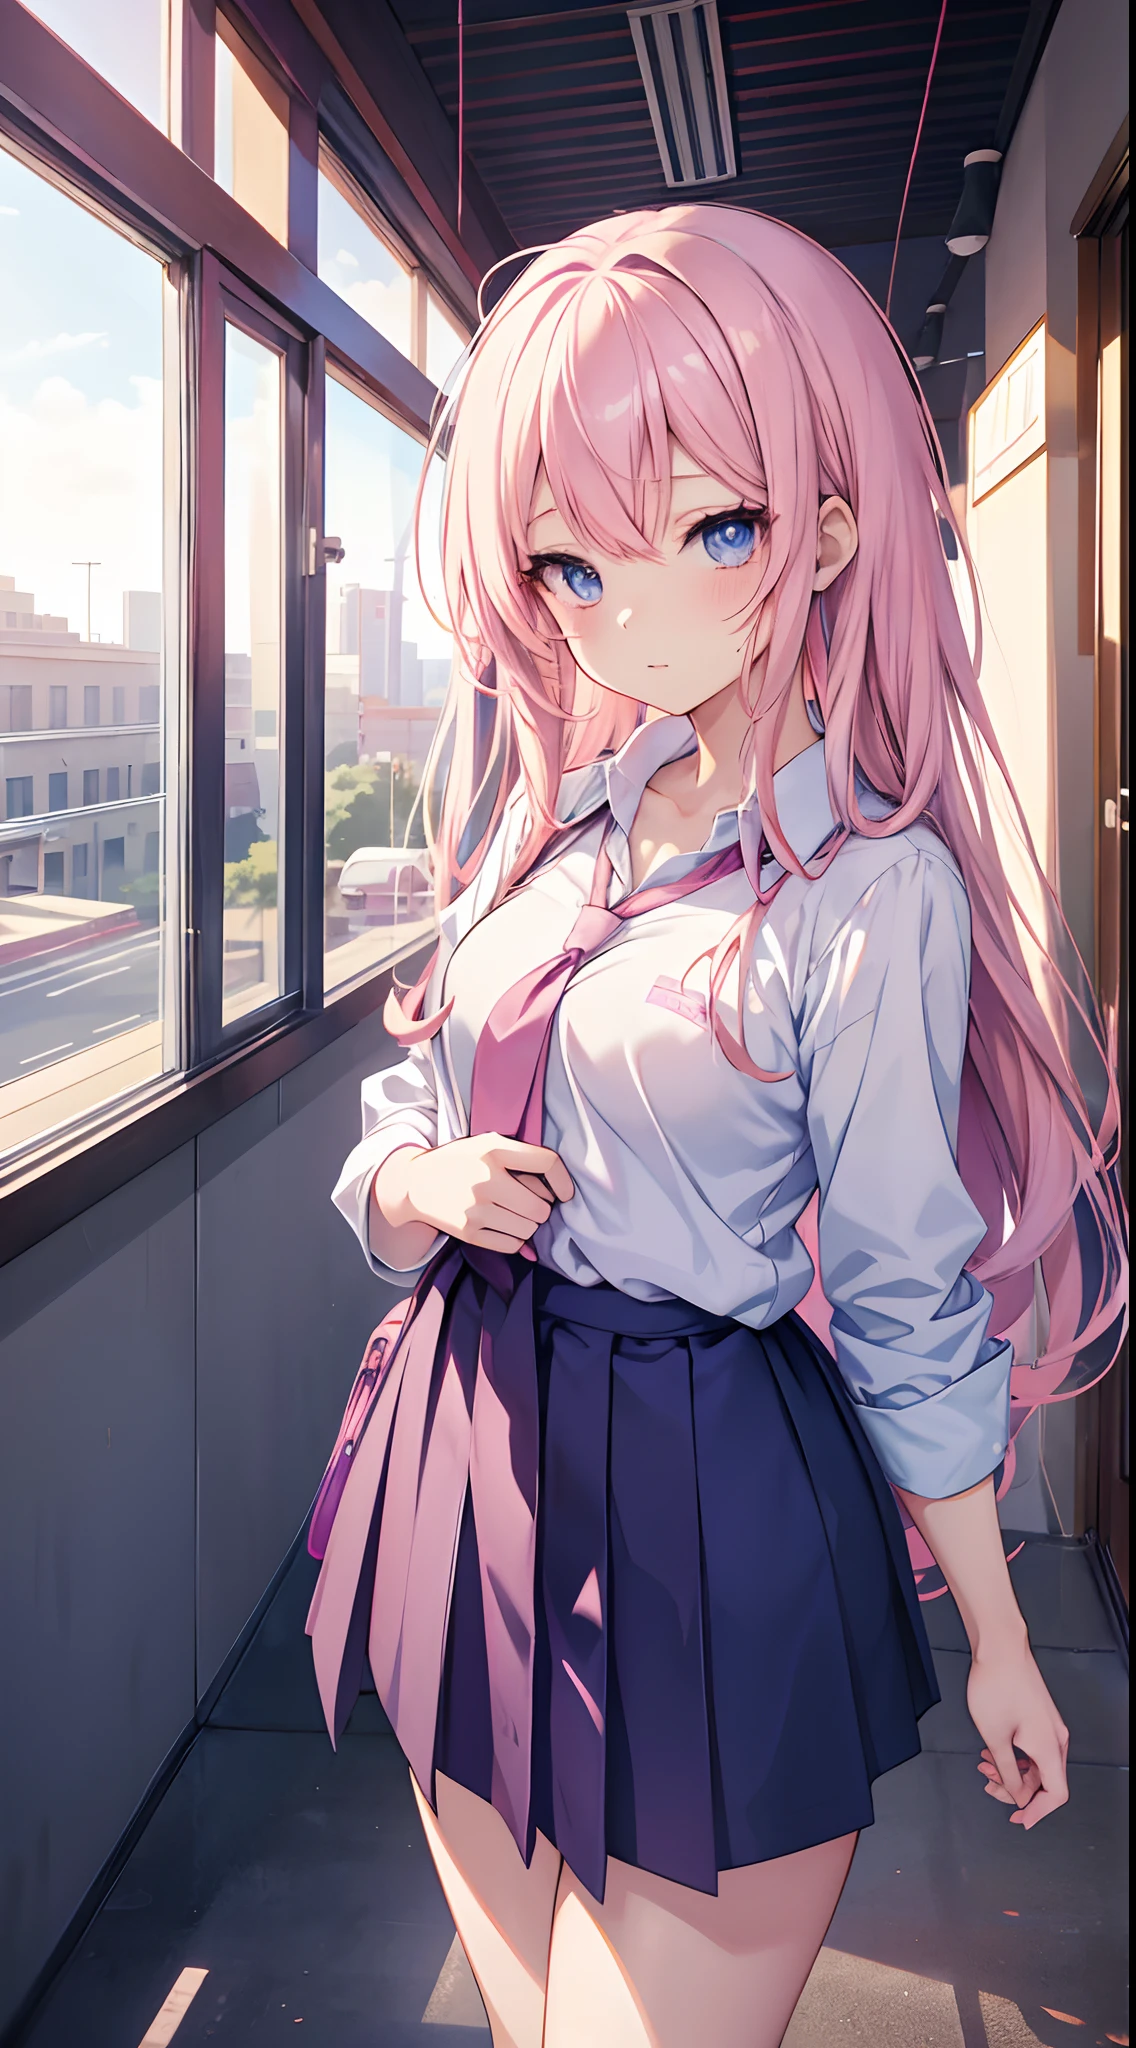 Anime girl with pink hair and - SeaArt AI